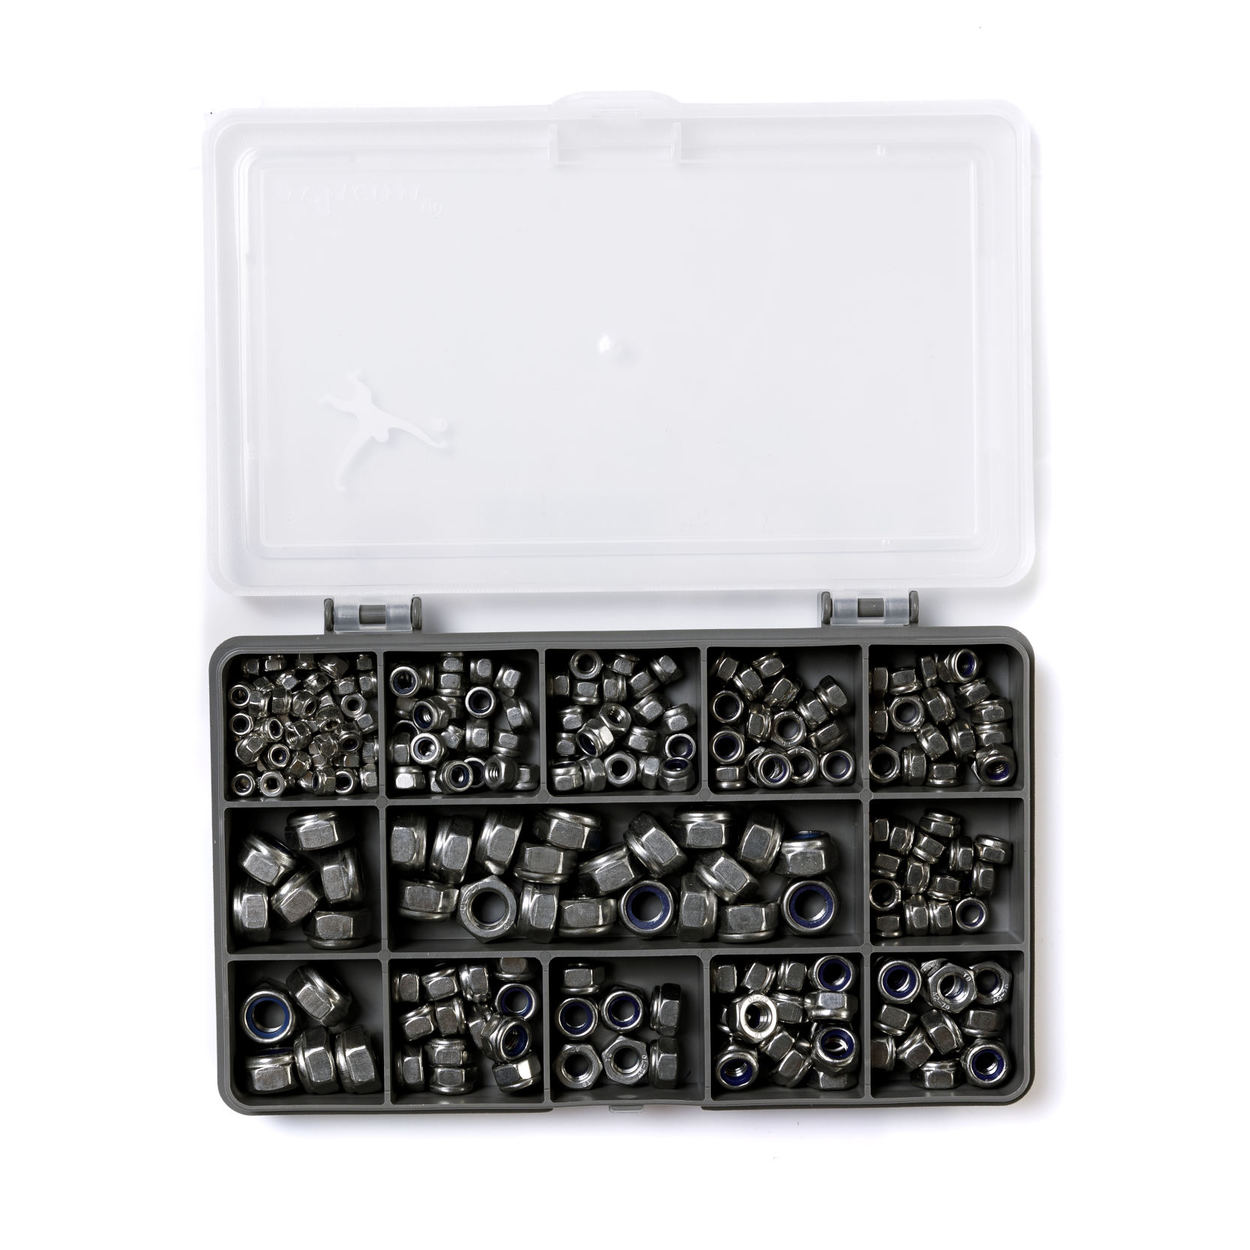 200 PIECE A2 STAINLESS NYLOC INSERT NUT KIT M2.5 M3 M4 M5 M6 M8 DIN985 NUTS 